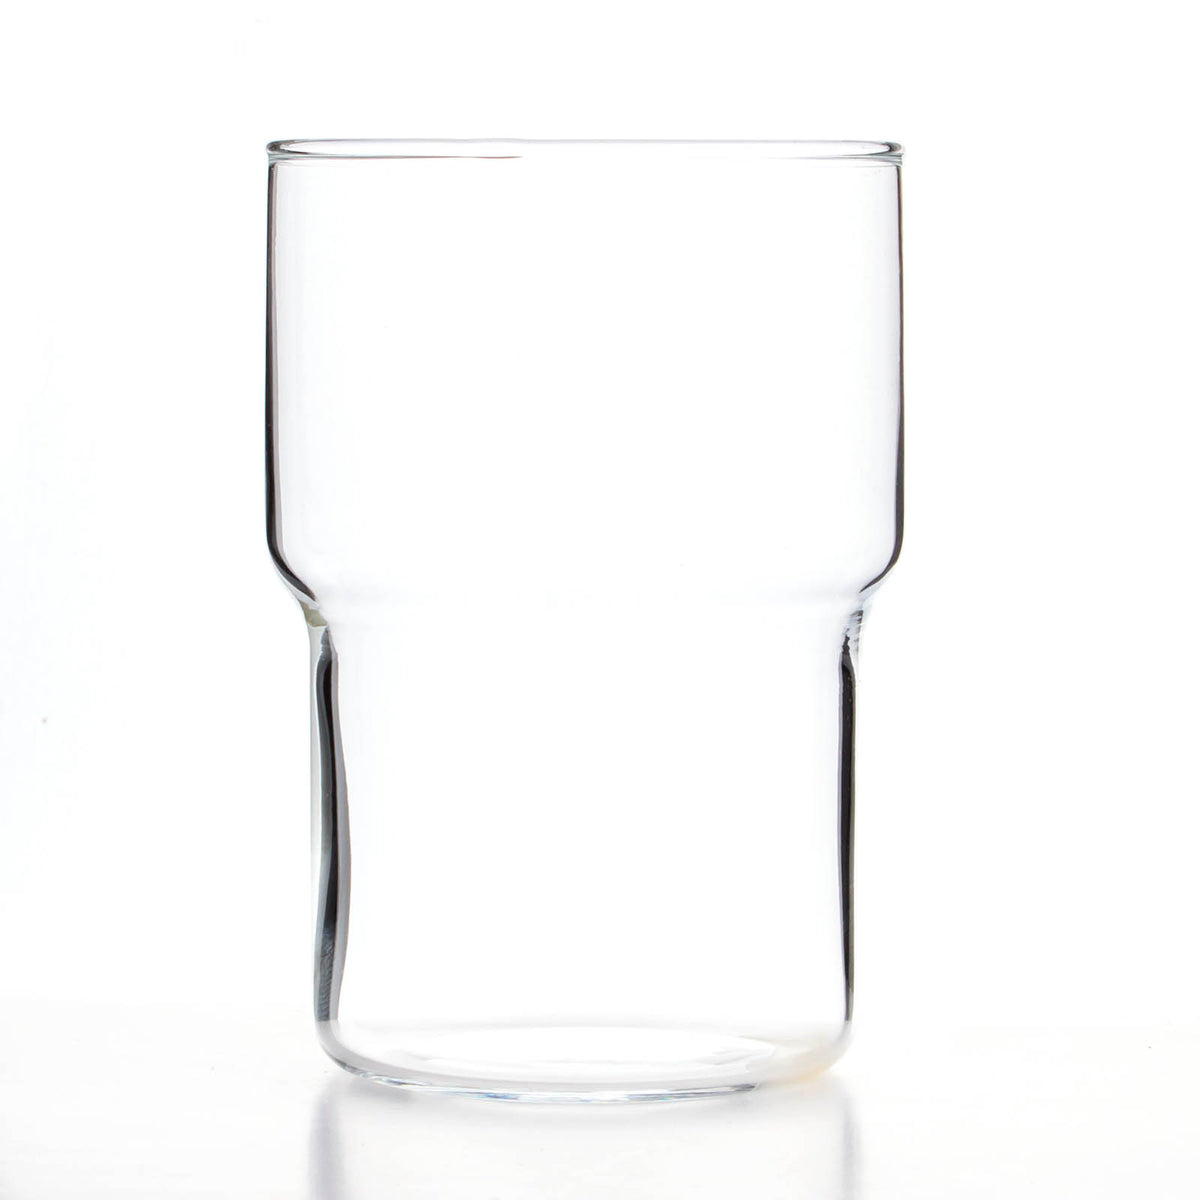 BarConic Wide Shaped Wine Glass - 15 Ounce (Quantity Options) Box of 6